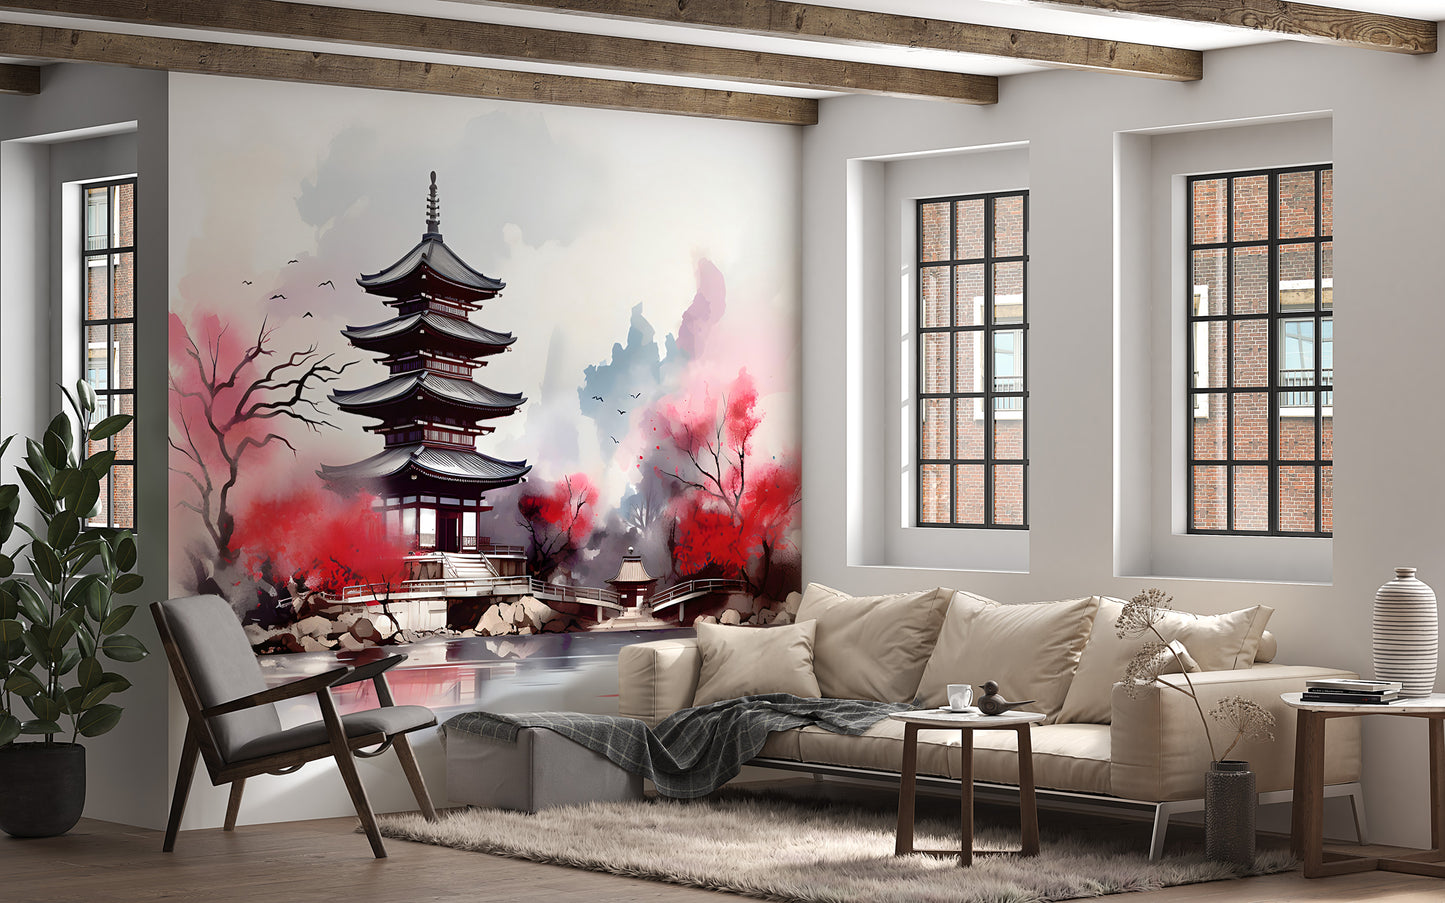 Artistic Removable Asian Wall Decor